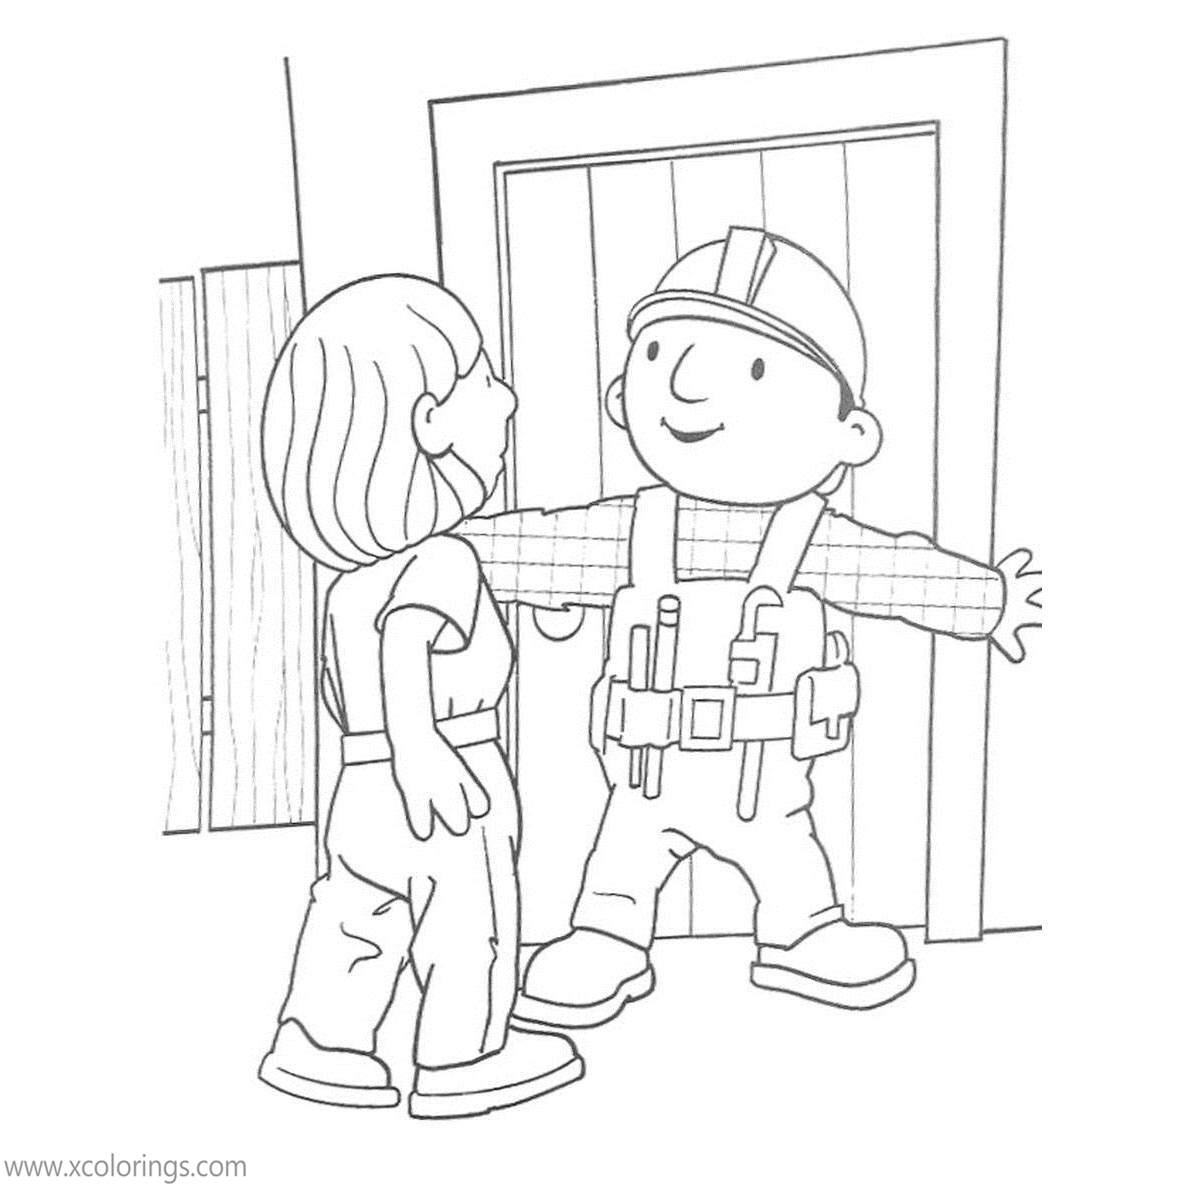 Free Bob the Builder Coloring Pages Carlie printable